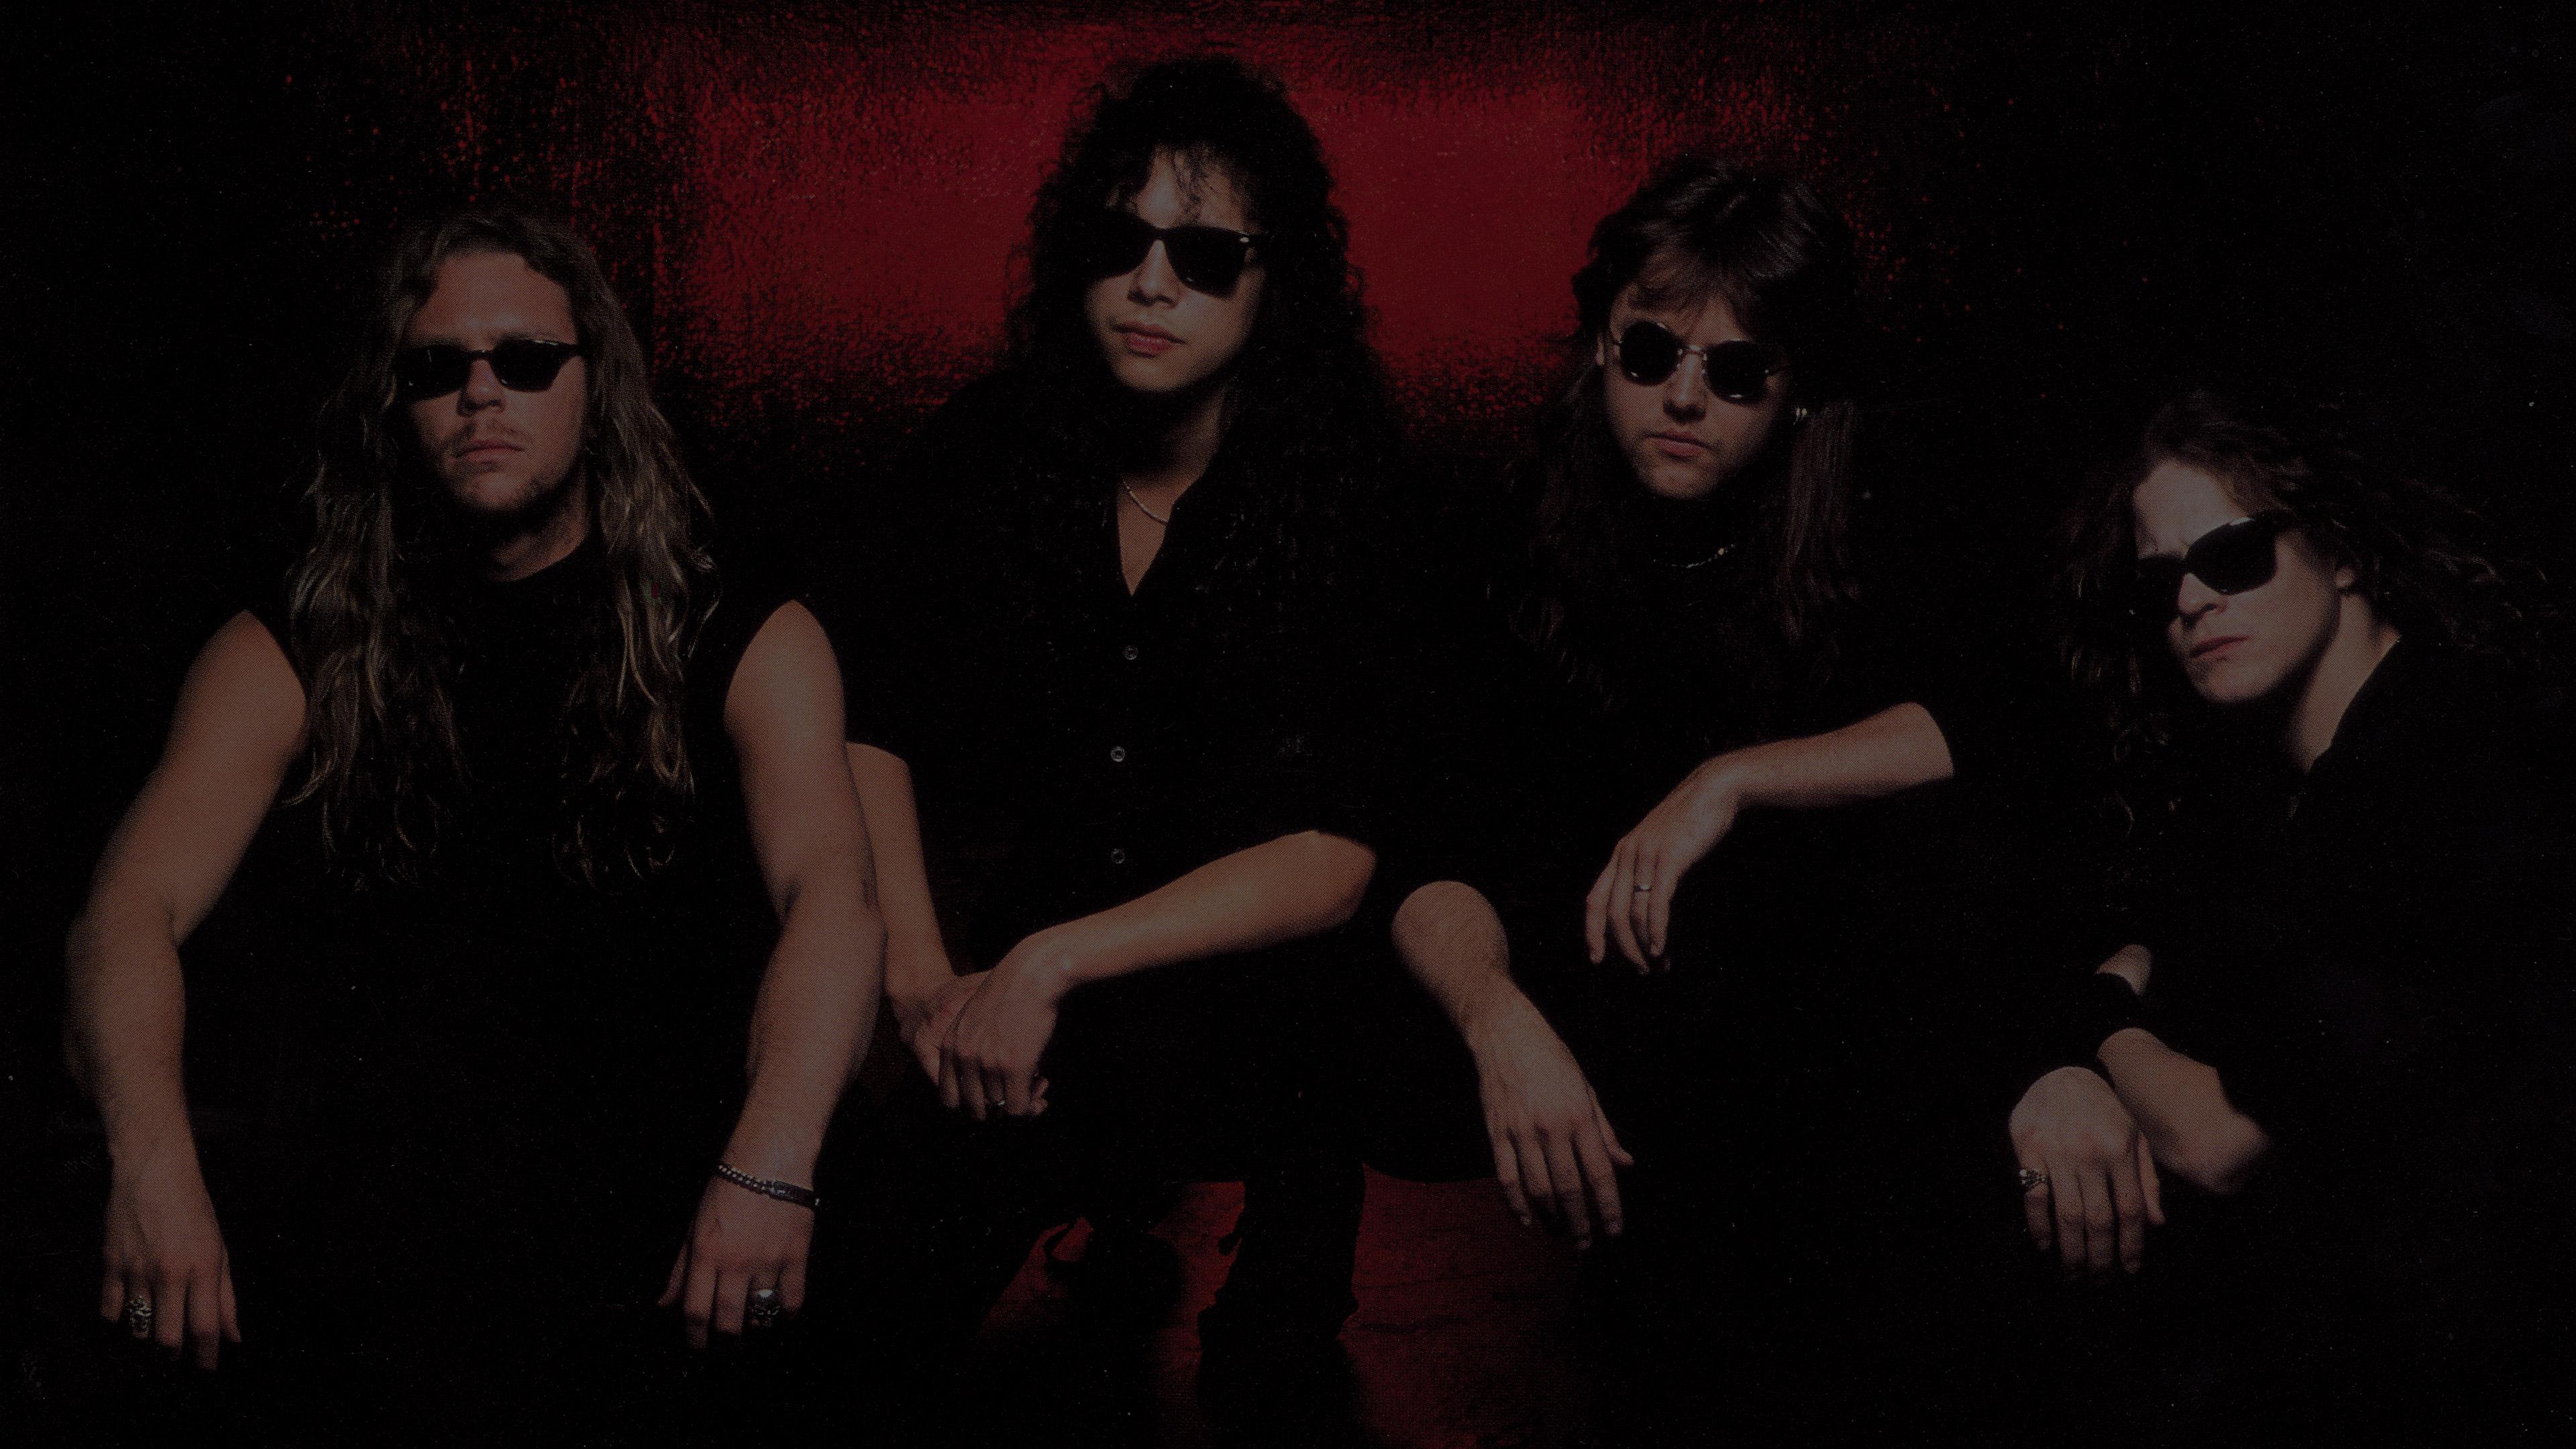 Banner Image for Metallica's Remastered Deluxe Box Set for "...And Justice for All"